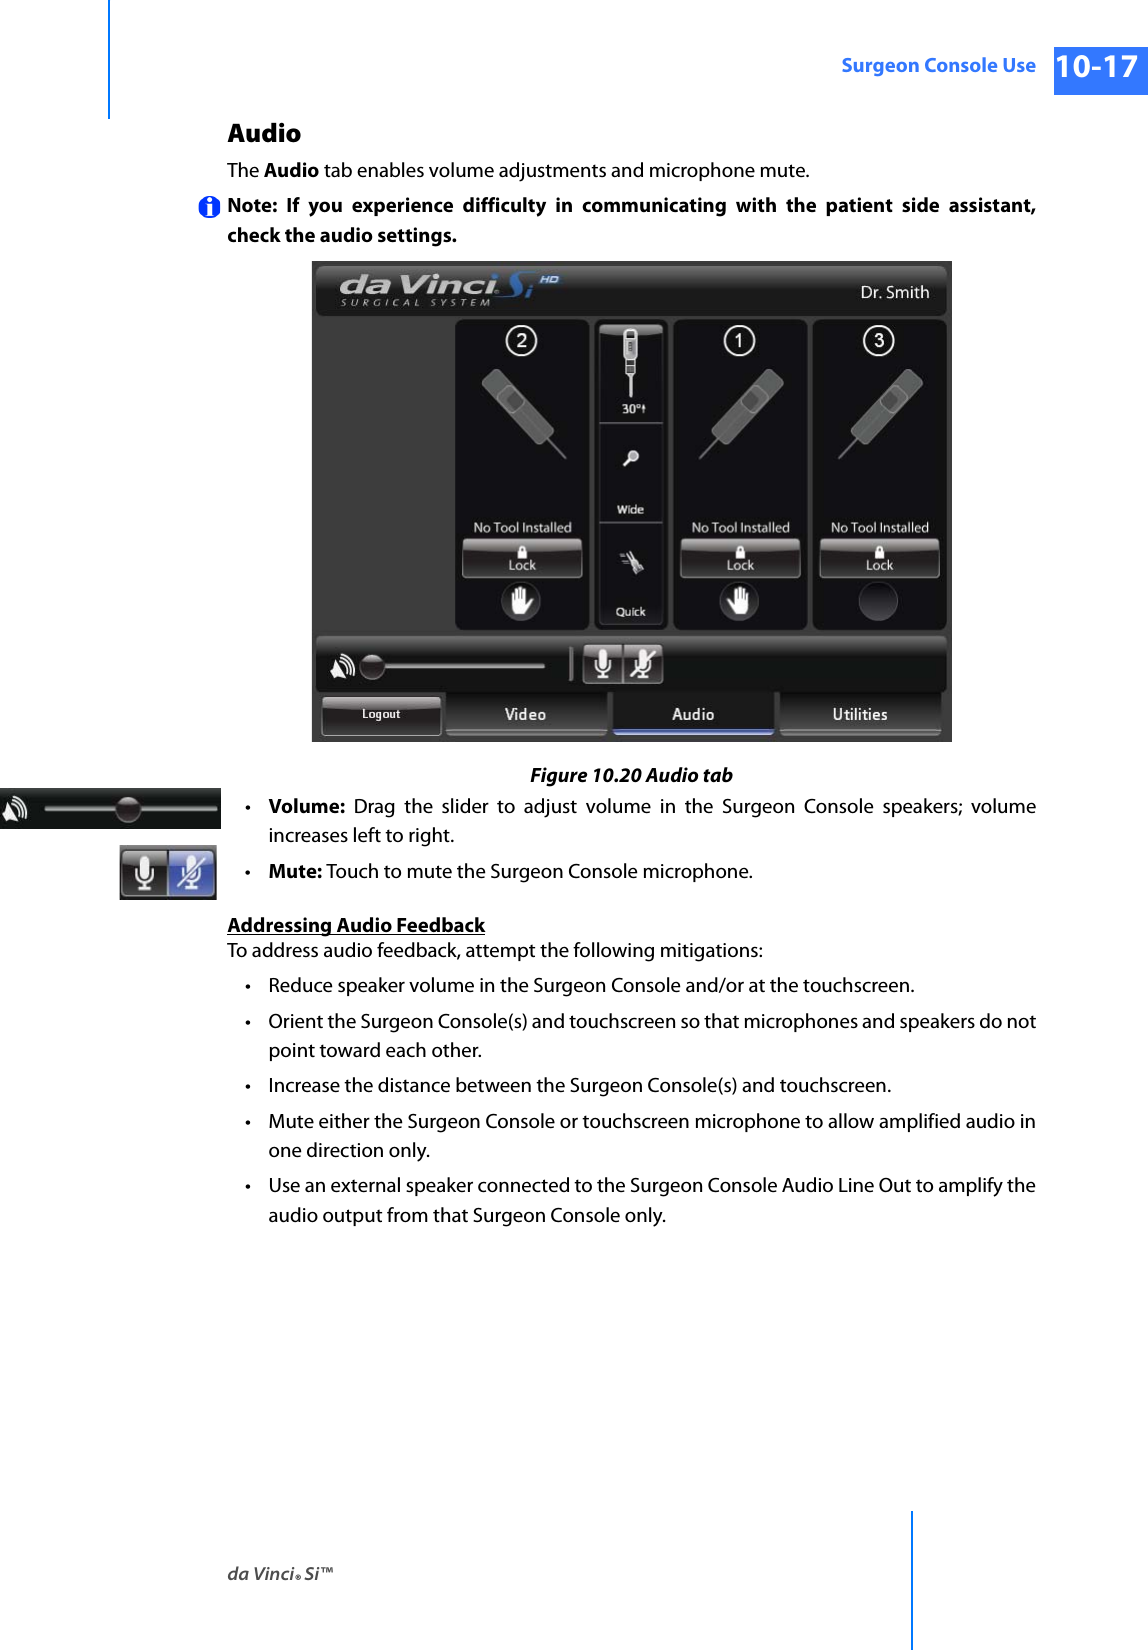 da Vinci® Si™Surgeon Console Use 10-17DRAFT/PRE-RELEASE/CONFIDENTIAL 10/9/14AudioThe Audio tab enables volume adjustments and microphone mute.Note: If you experience difficulty in communicating with the patient side assistant, check the audio settings.Figure 10.20 Audio tab•Volume: Drag the slider to adjust volume in the Surgeon Console speakers; volume increases left to right.•Mute: Touch to mute the Surgeon Console microphone.Addressing Audio FeedbackTo address audio feedback, attempt the following mitigations:• Reduce speaker volume in the Surgeon Console and/or at the touchscreen.• Orient the Surgeon Console(s) and touchscreen so that microphones and speakers do not point toward each other.• Increase the distance between the Surgeon Console(s) and touchscreen.• Mute either the Surgeon Console or touchscreen microphone to allow amplified audio in one direction only.• Use an external speaker connected to the Surgeon Console Audio Line Out to amplify the audio output from that Surgeon Console only.